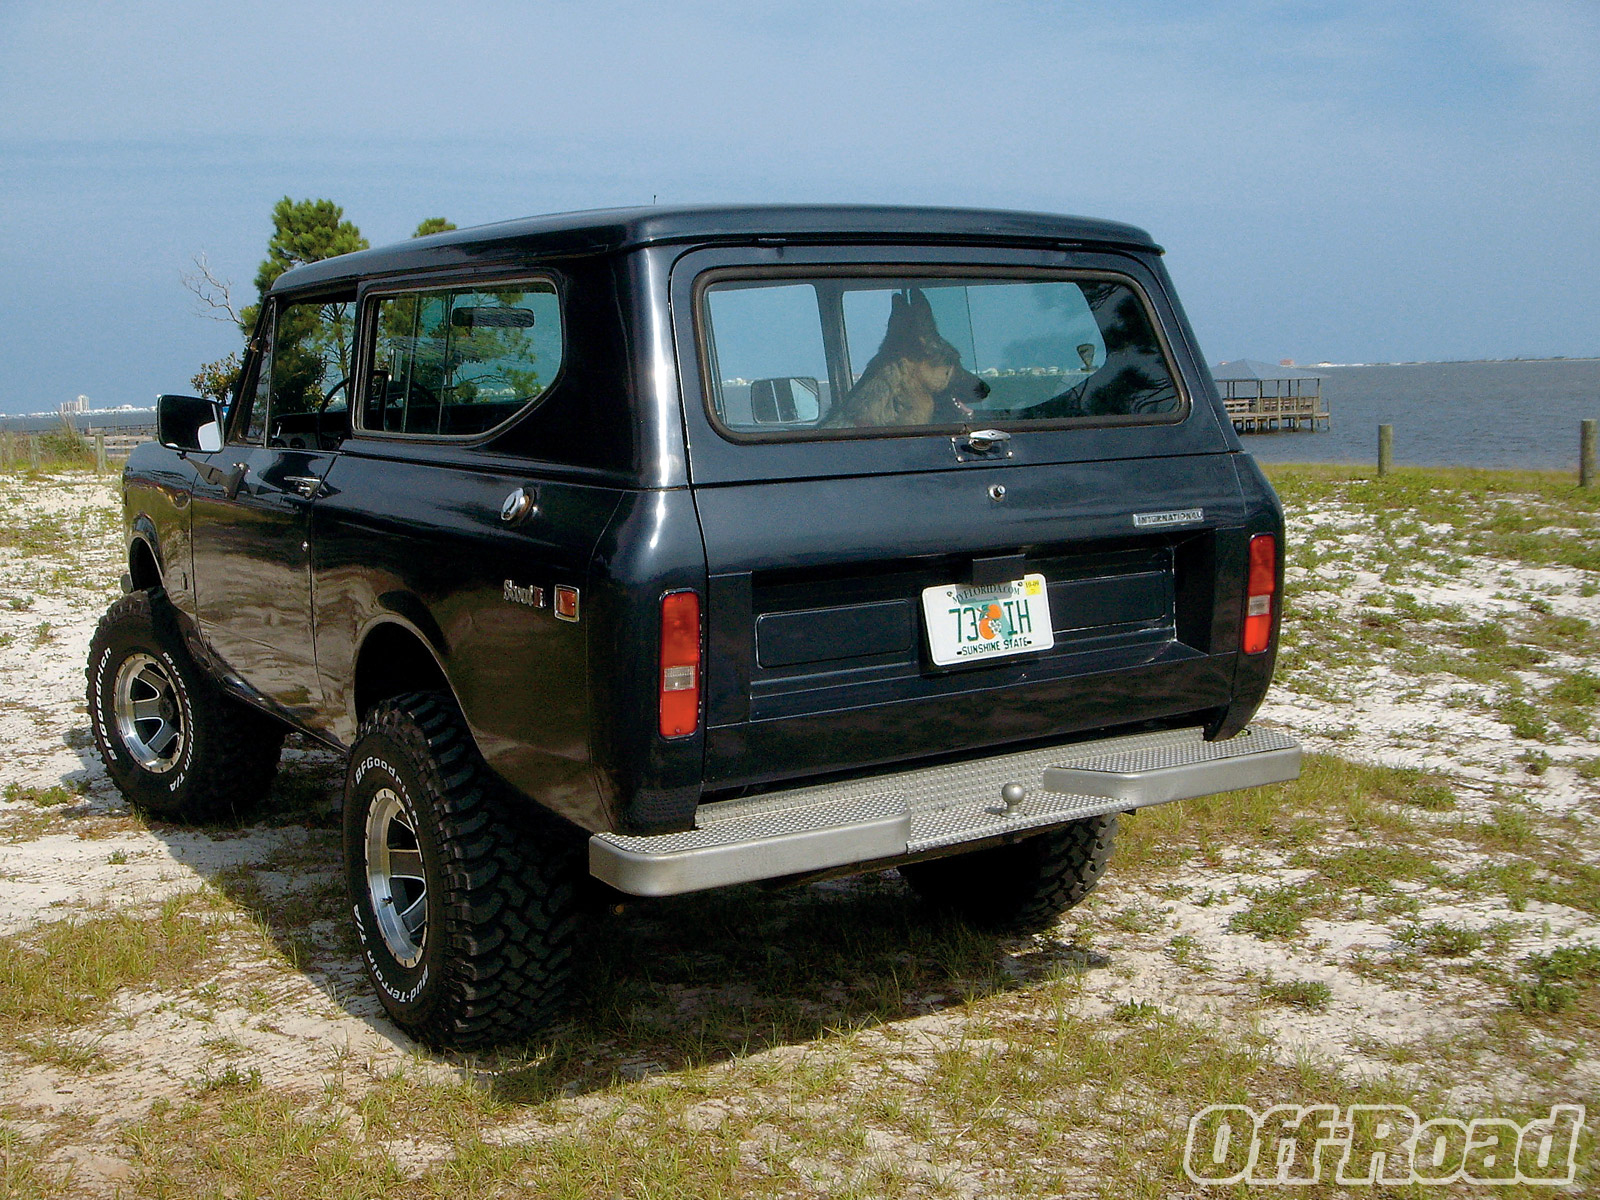 1973 International Harvester Scout Ii Rear Left View Photo 4